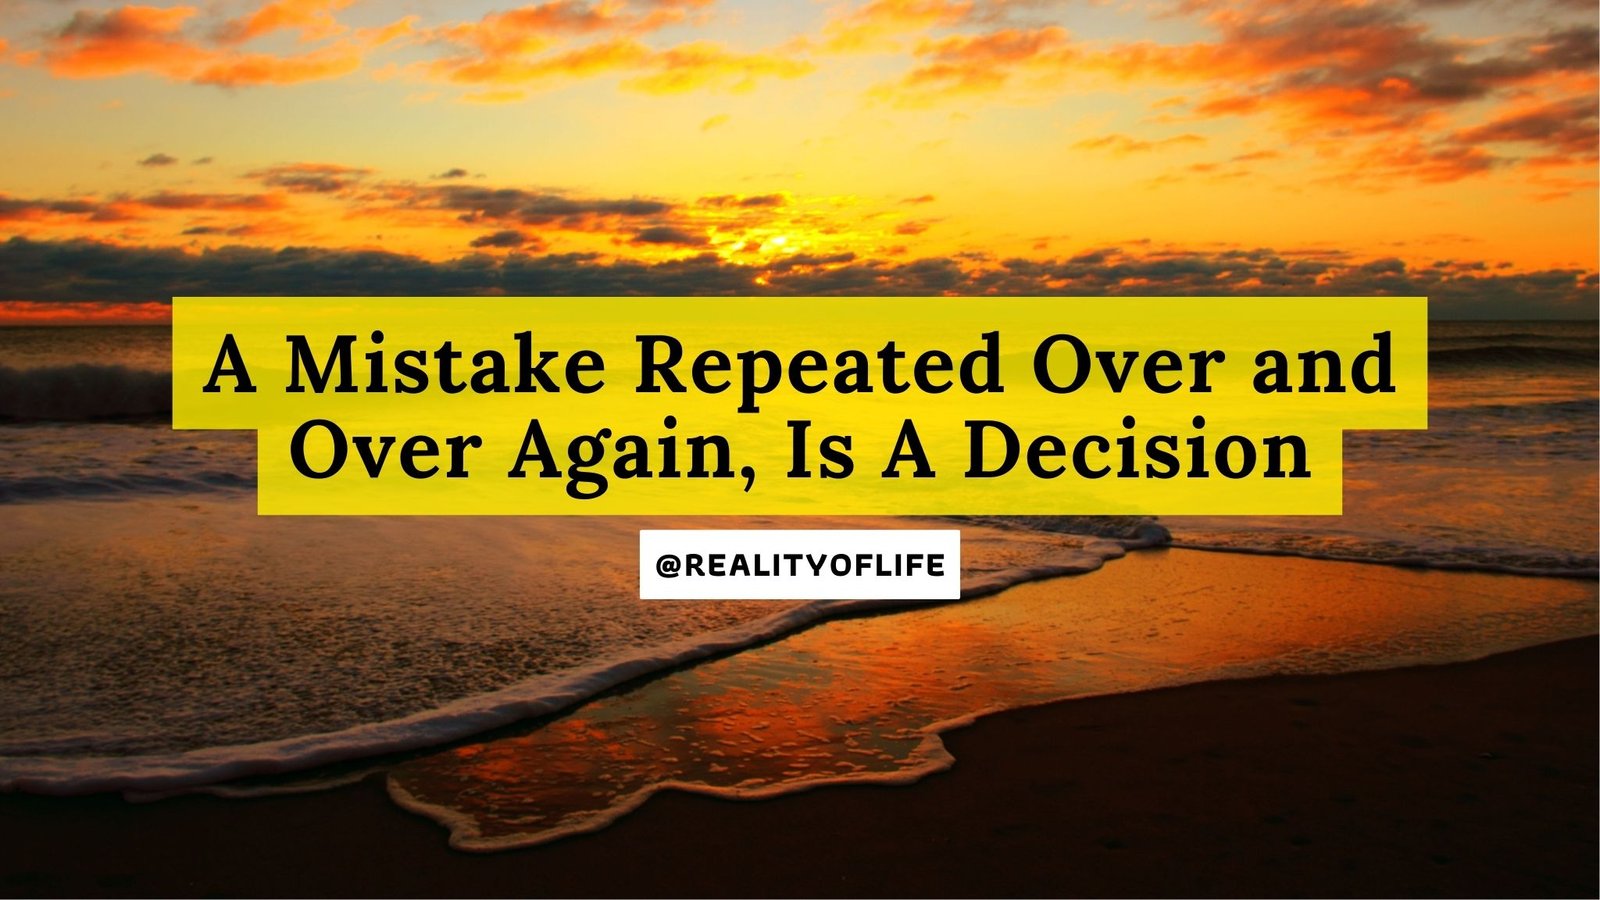 A Mistake Repeated Over and Over Again, Is A Decision